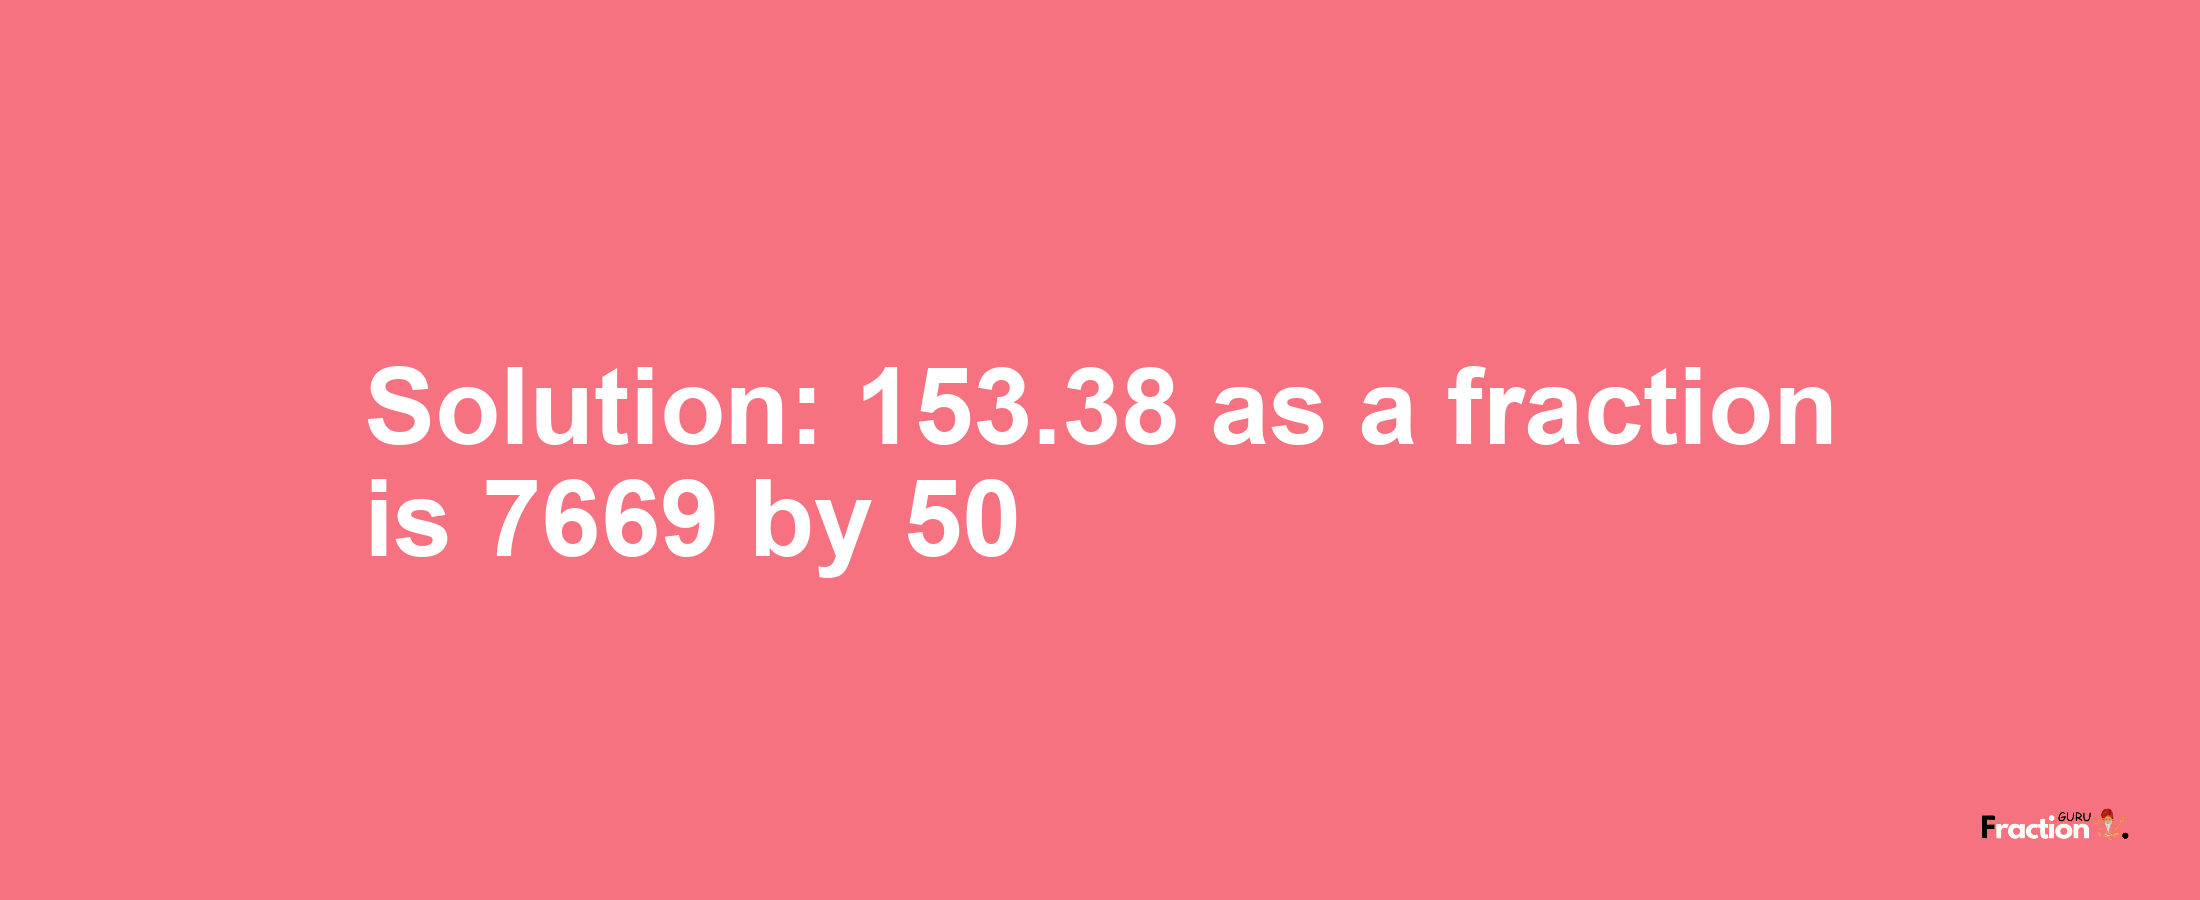 Solution:153.38 as a fraction is 7669/50